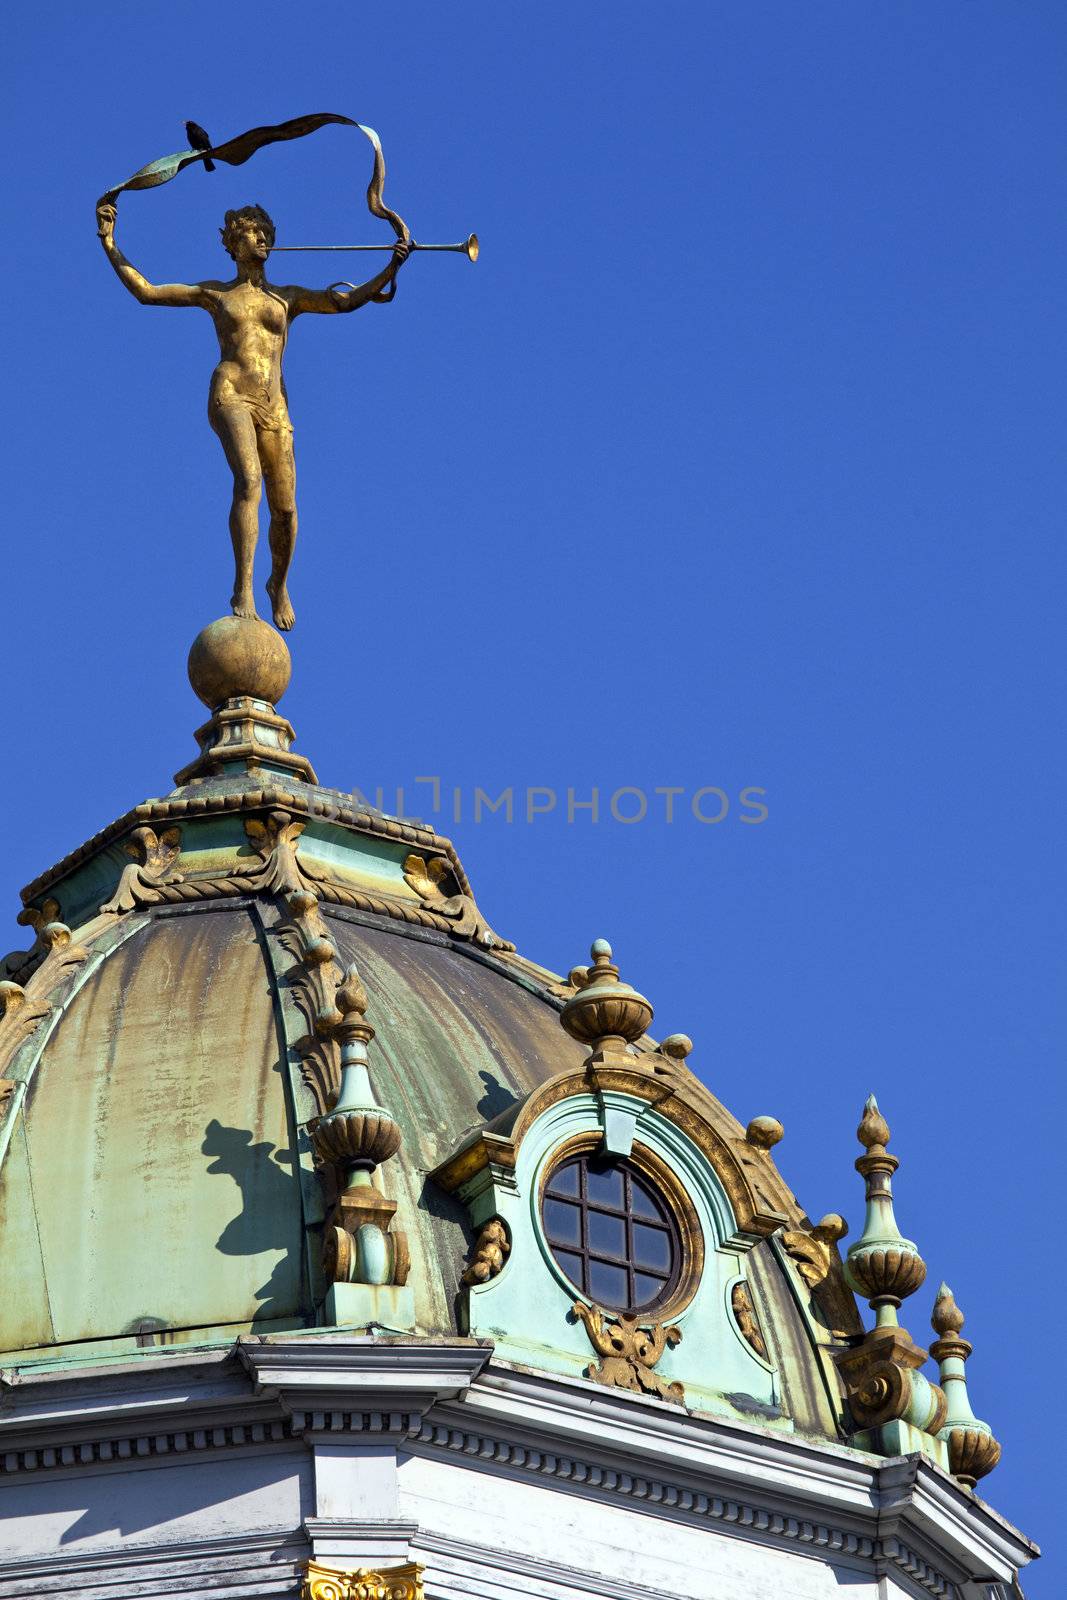 A beautiful sculpture on one of the Guildhalls in Grand Place, Brussels.